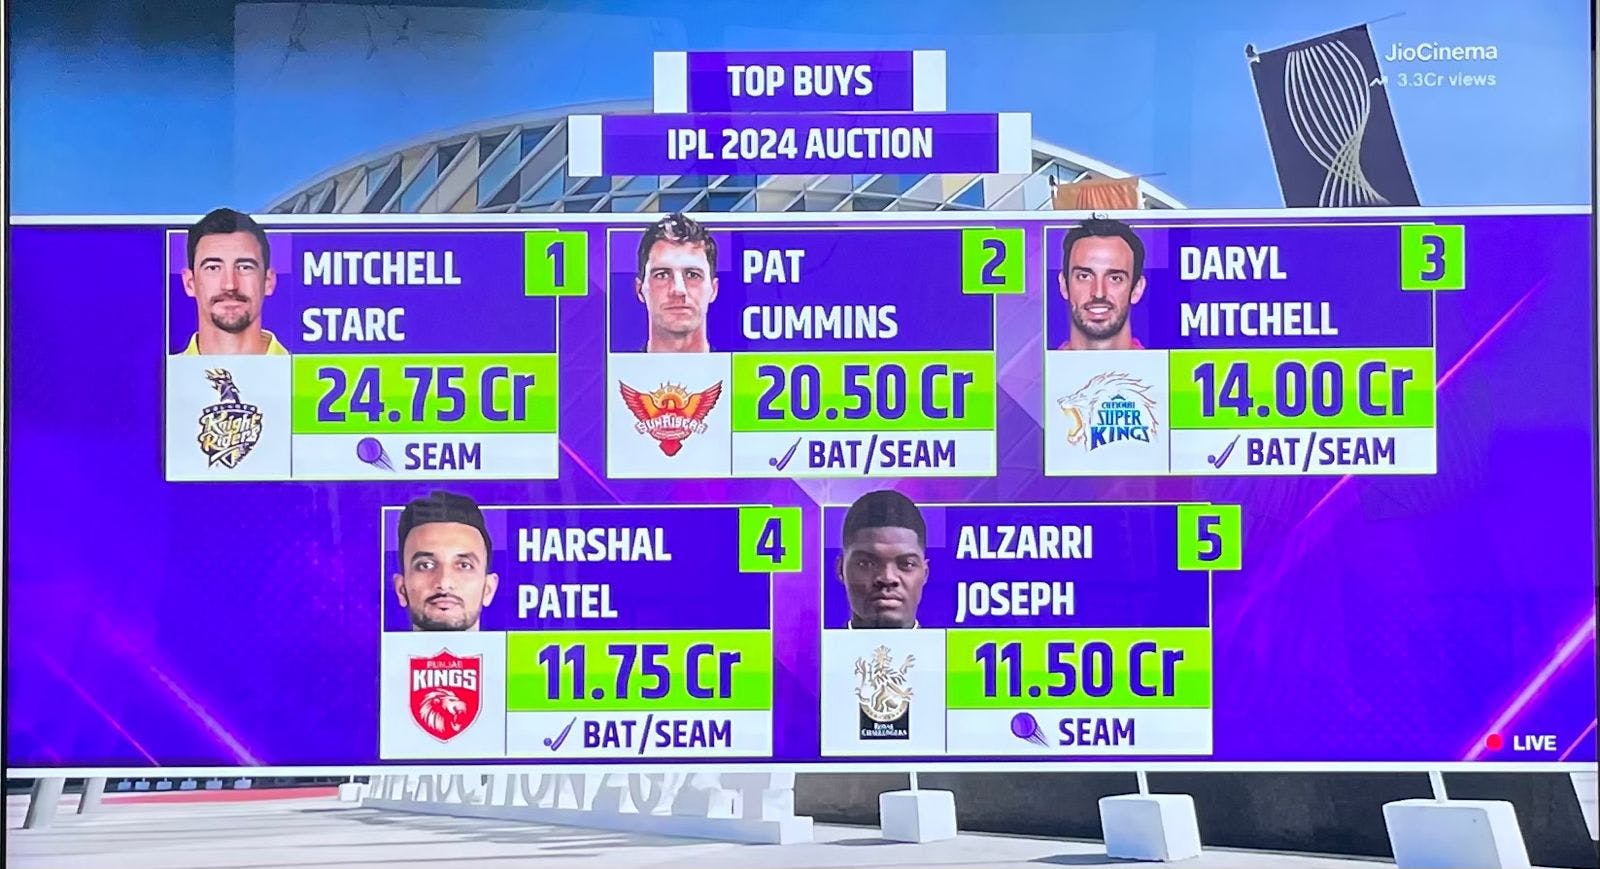 Who Fetched the Highest Price? The Most Expensive Player in IPL 2024